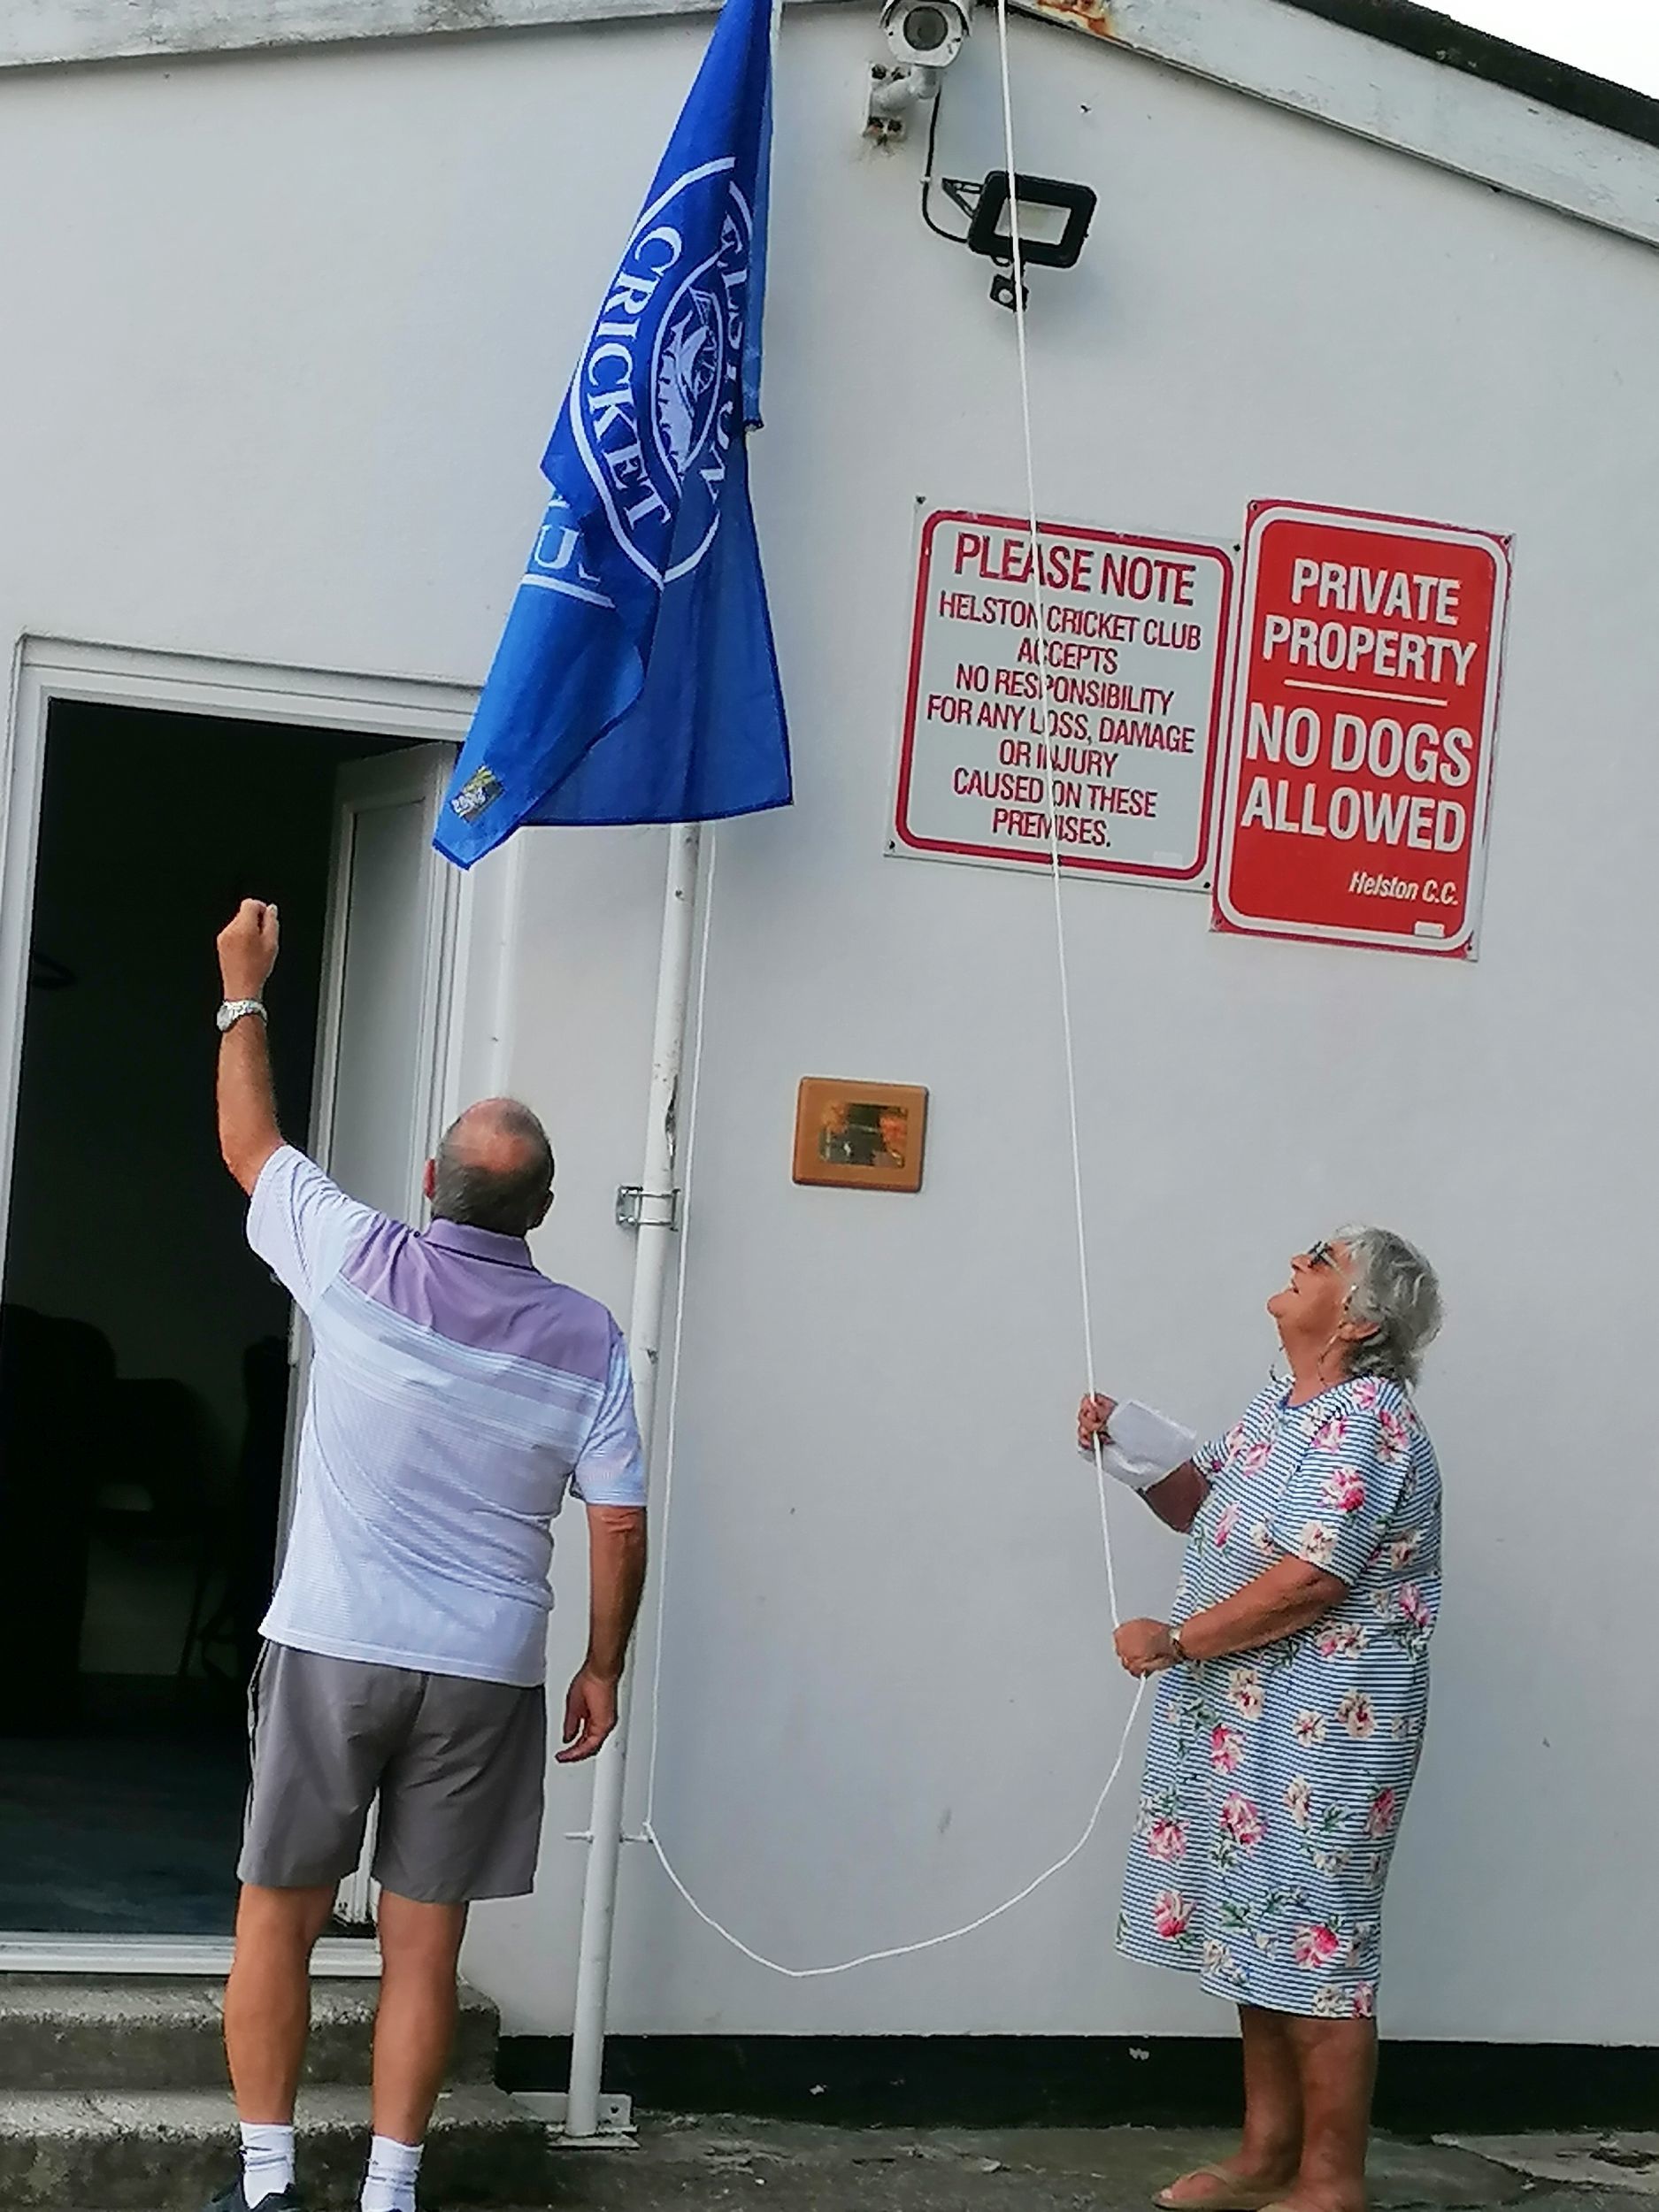 Deirdre and Peter flying the new flag above the clubhouse for the first time